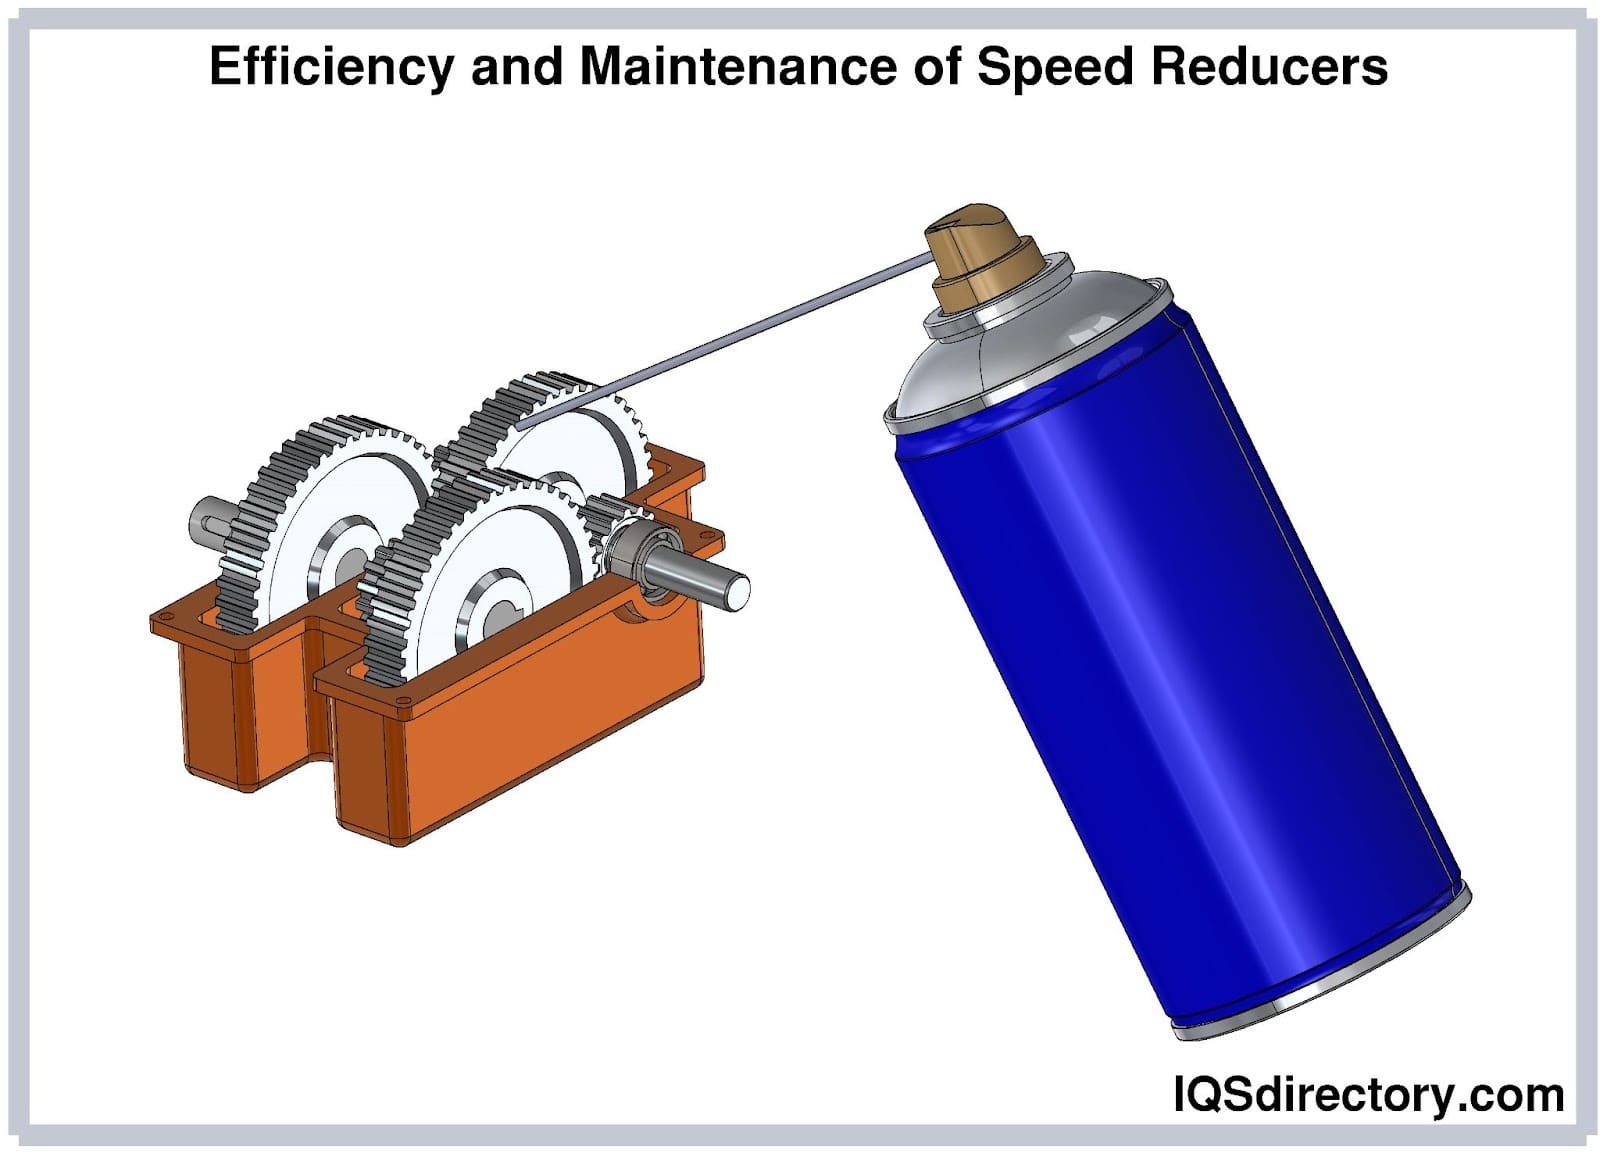 Efficiency and Maintenance of Speed Reducers